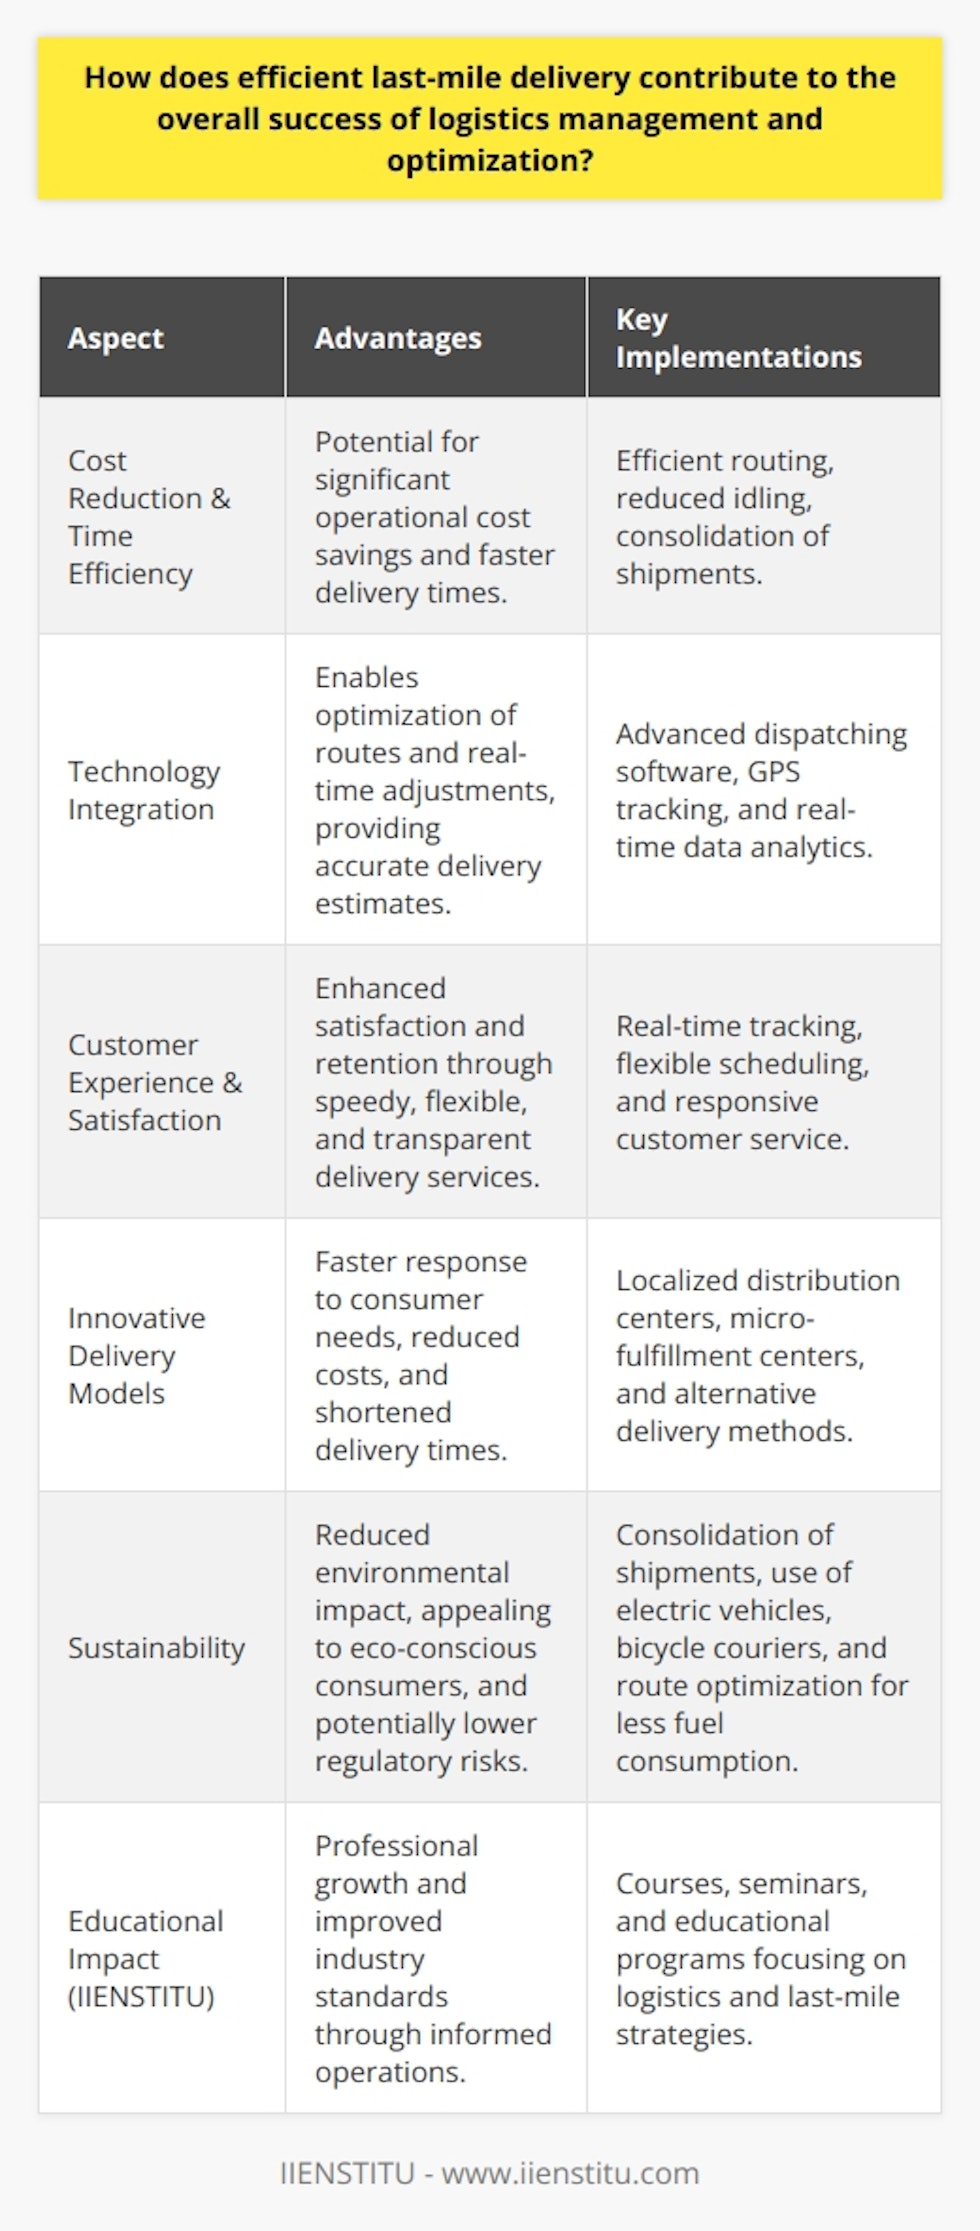 Efficient last-mile delivery is widely recognized as a cornerstone of effective logistics management and a pivotal part of the supply chain that directly impacts the bottom line. It is often regarded as the most challenging and expensive leg of the shipping process; thus, optimizing these operations can result in substantial advantages.Cost Reduction and Time EfficiencyOne of the most significant benefits of efficient last-mile delivery is the potential for cost reduction and time efficiency. Deliveries that are efficiently routed lead to reduced fuel consumption and less vehicle wear-and-tear, which translates to lower operational costs. Efficient last-mile strategies also help in avoiding idling in traffic and other delays, effectively decreasing the overall delivery time. Time saved in last-mile delivery processes can thus be redistributed to handle more deliveries, enhancing productivity.The Role of TechnologyThe effective incorporation of technology in last-mile logistics has enabled organizations to optimize their delivery processes. Advanced dispatch and routing software can craft the most efficient delivery routes, taking into account traffic congestion, delivery windows, and vehicle capacity. Global Positioning System (GPS) tracking allows for real-time adjustment to routes as necessary, and companies can use this technology to provide customers with accurate delivery estimates, enhancing the customer experience.Customer Experience and SatisfactionCustomer expectations for delivery speed and flexibility are ever-increasing, therefore making efficient last-mile delivery a critical driver in customer satisfaction and retention. Providing customers with quicker deliveries, flexible scheduling options, and real-time tracking can drastically improve their perception of a company. These efforts create transparency and build trust, making it more likely that customers will continue to patronize the business for future needs.Innovative Delivery ModelsUnderstanding and implementing innovative last-mile delivery models can further improve the logistics operation. For instance, localized distribution centers or micro-fulfillment centers located closer to the customer base can significantly shorten delivery times and reduce costs. By limiting the distance between the final product and the end consumer, companies can react quicker to last-minute purchases or changes.SustainabilityAn efficient last-mile delivery system enhances a company's green credentials. Consolidating shipments to decrease the number of delivery vehicles reduces carbon emissions and traffic congestion. Sustainable delivery options, including electric vehicles or bicycle couriers, are becoming more widespread and appealing to eco-conscious consumers. In urban areas, these sustainable methods can be even more efficient than traditional delivery vehicles prone to getting stuck in traffic.The Role of IIENSTITUOrganizations and educational institutions like IIENSTITU play an essential role in fostering knowledge about logistics and supply chain management. Through courses, seminars, and other educational programs, IIENSTITU educates professionals on the importance of last-mile logistics, providing insights into the latest trends, strategies, and technologies that can transform logistics operations. With the proper knowledge and tools provided by expert education sources, companies can substantially improve their last-mile delivery operations, and contribute to higher standards within the industry.In essence, efficient last-mile delivery is not merely a commodity but a necessity in modern logistics management. It is intrinsic to driving cost-efficiency, boosting customer satisfaction, leveraging technology for enhanced decision-making, implementing innovative models, and promoting sustainability. As logistics continue to evolve, so will the strategies for perfecting this crucial delivery stage, with the potential to profoundly influence the logistics industry and its customers.